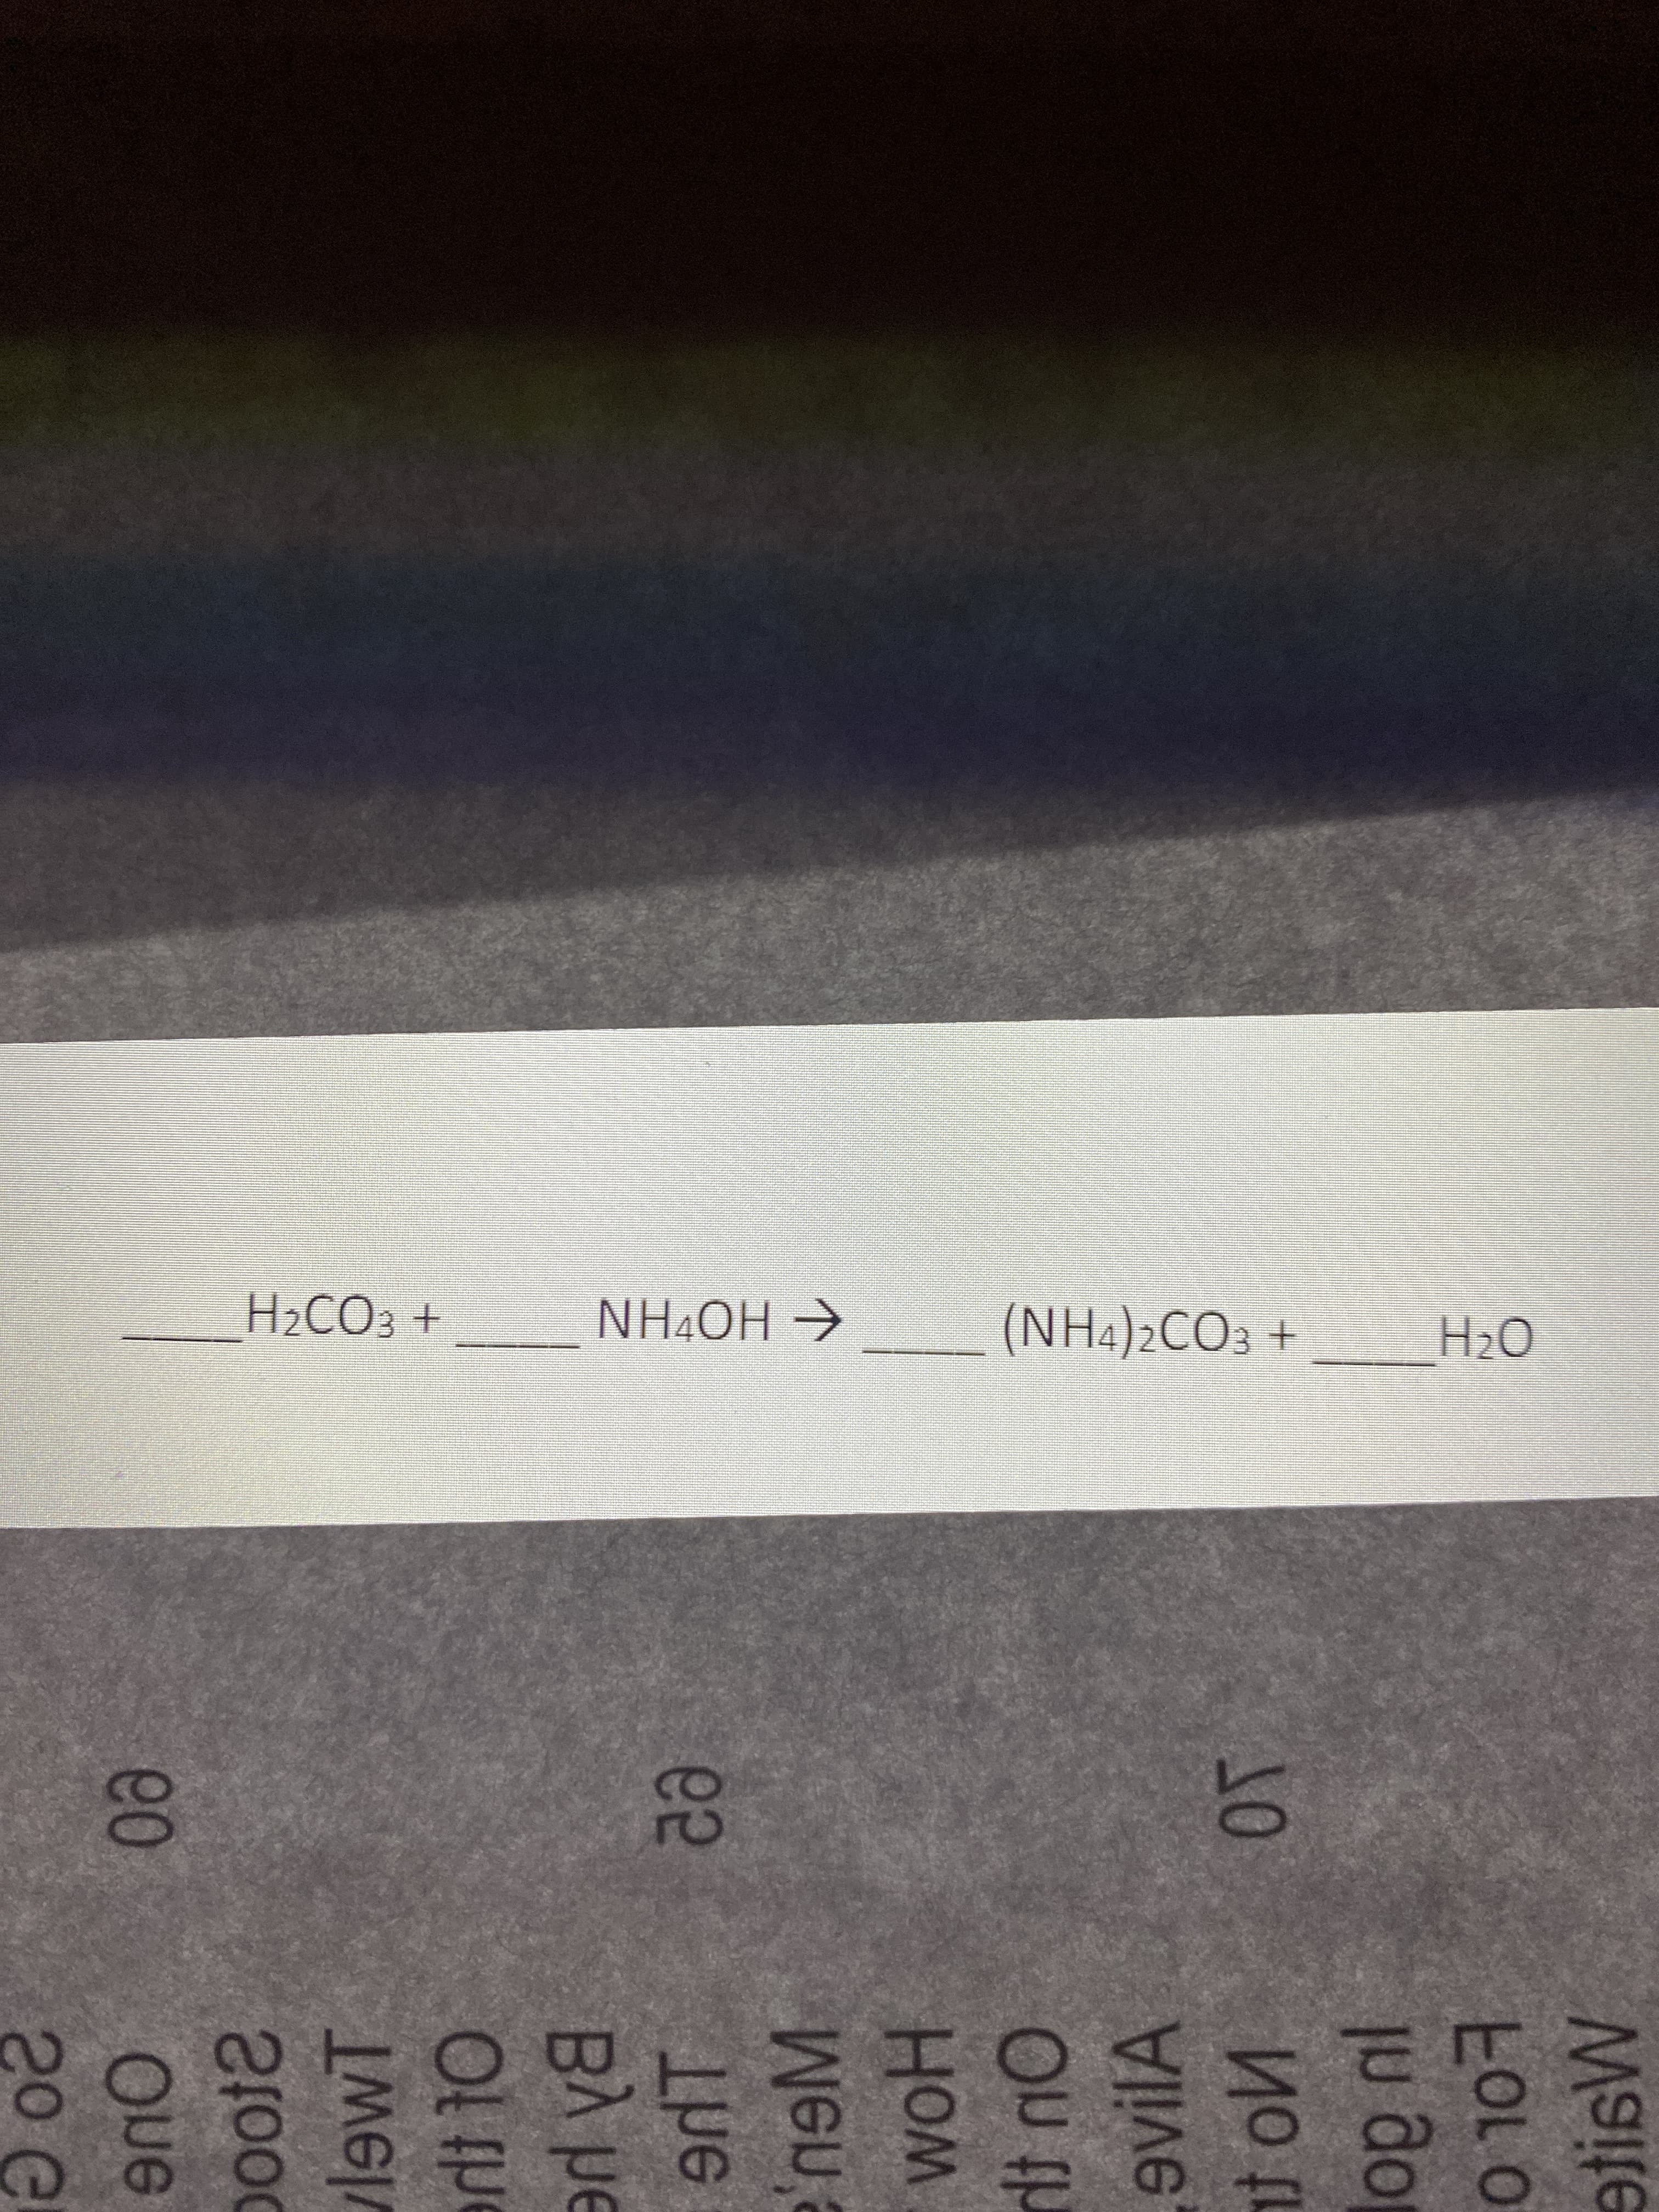 H2CO3 +
NH¼OH →
(NH:)>CO, +
H2O
